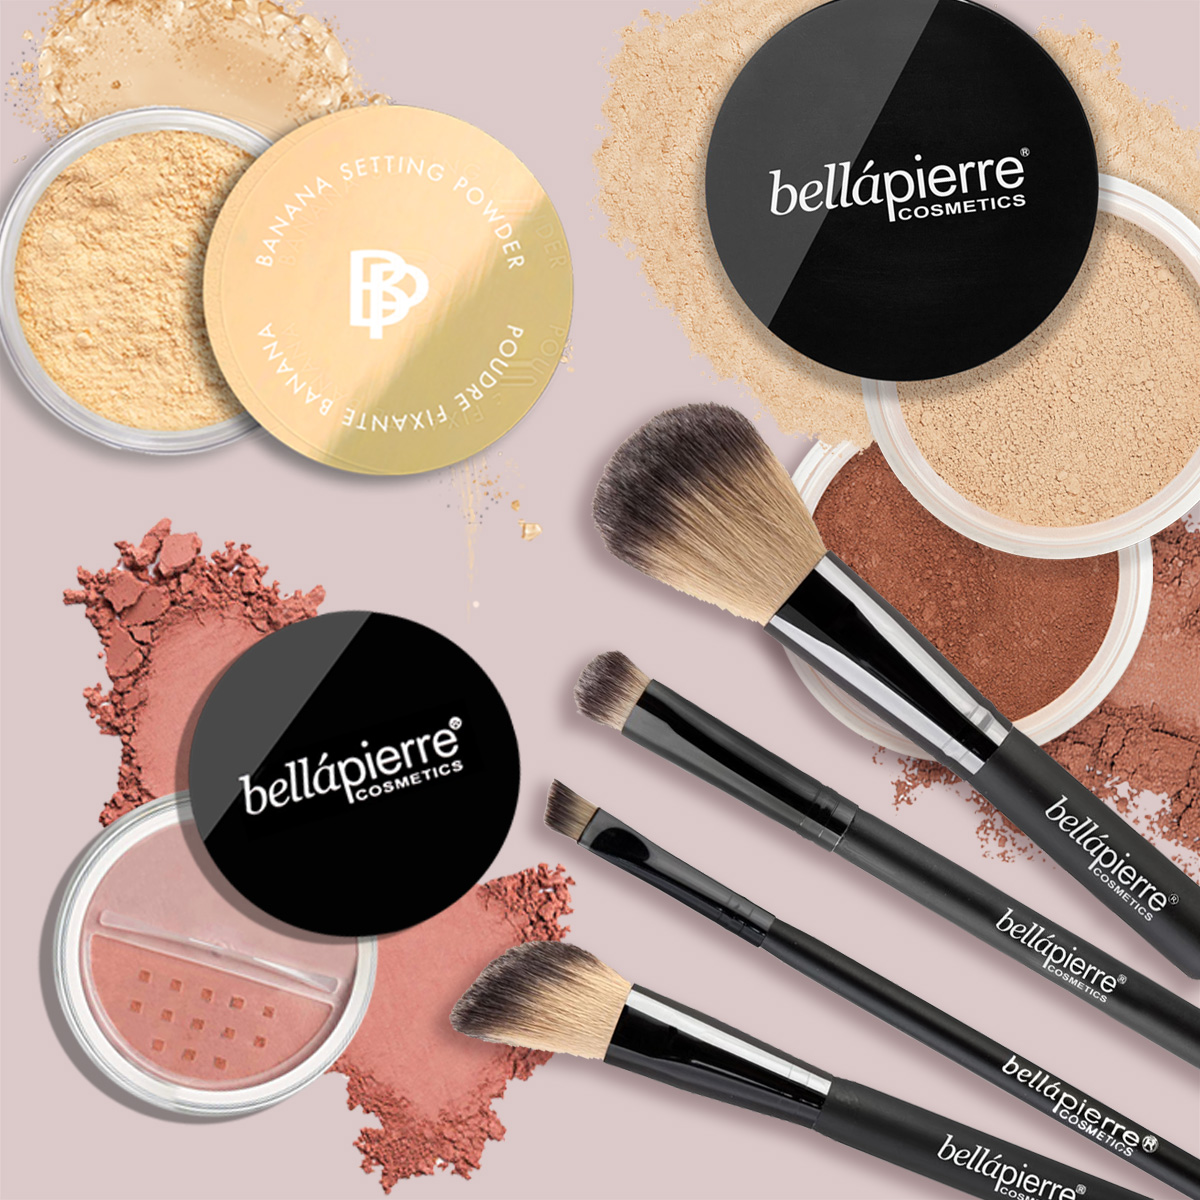 Top Tips for Mineral Makeup Application